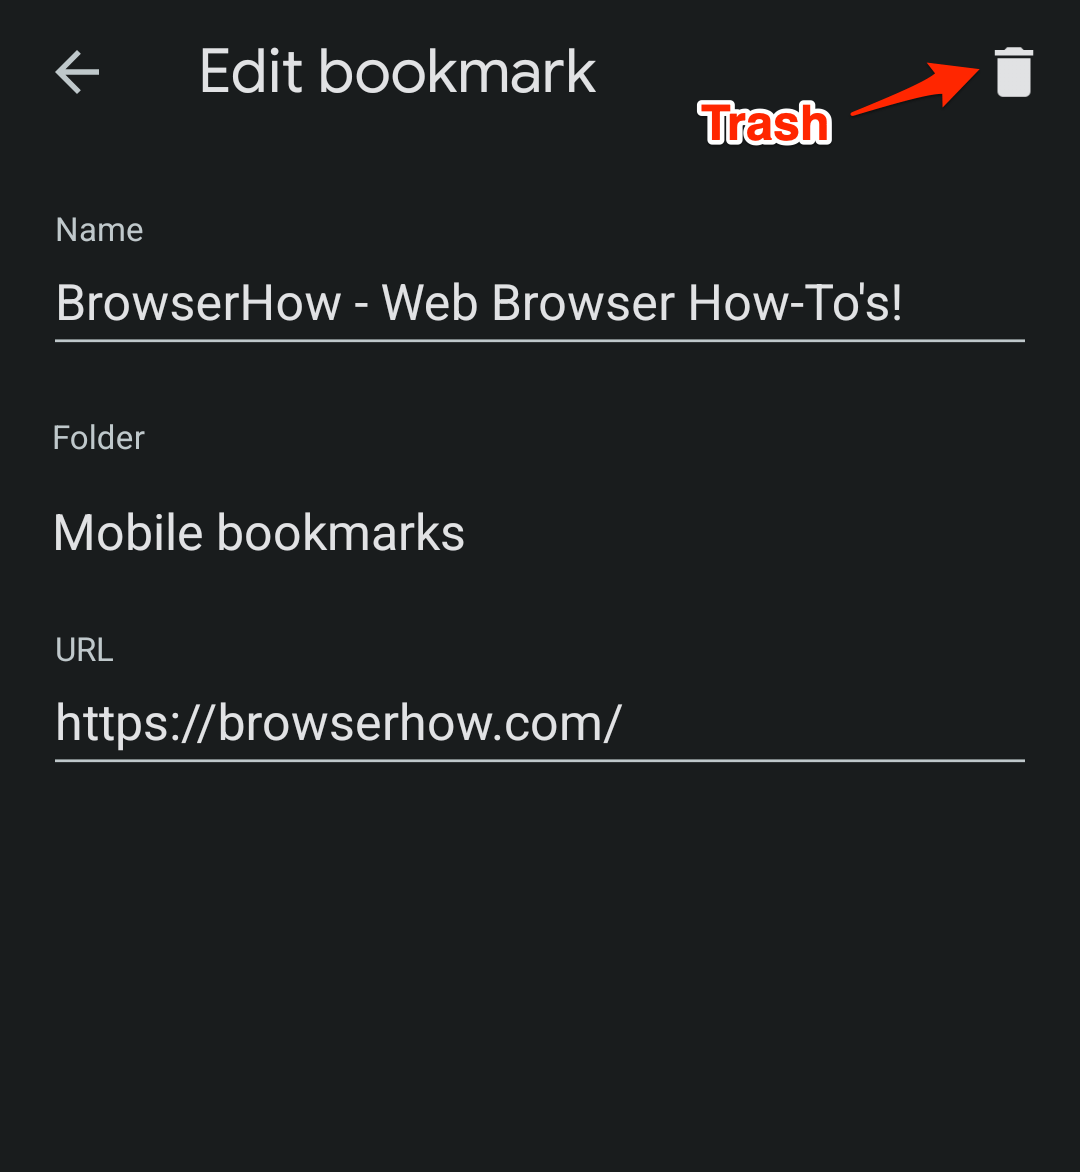 Edit Bookmark screen on Chrome Android